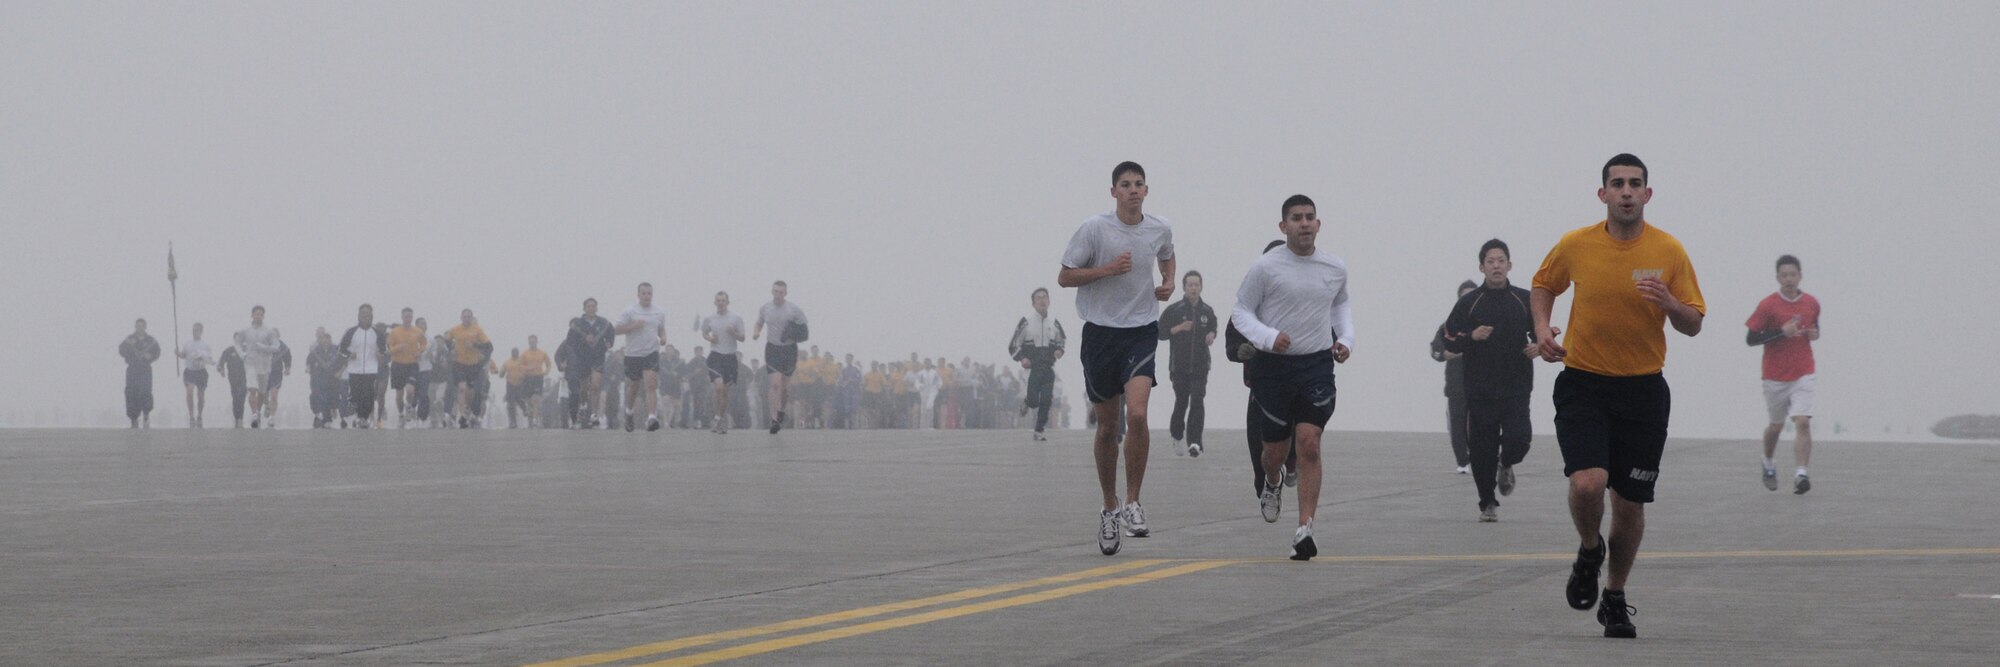 MISAWA AIR BASE, Japan -- Airmen, Soldiers, Sailors and members of the Japan Air Self-Defense Force start the first readiness run of the year May 8, 2009. Runners had the option of a two- or four-mile course on the flightline. (U.S. Air Force photo by Senior Airman Jamal Sutter)